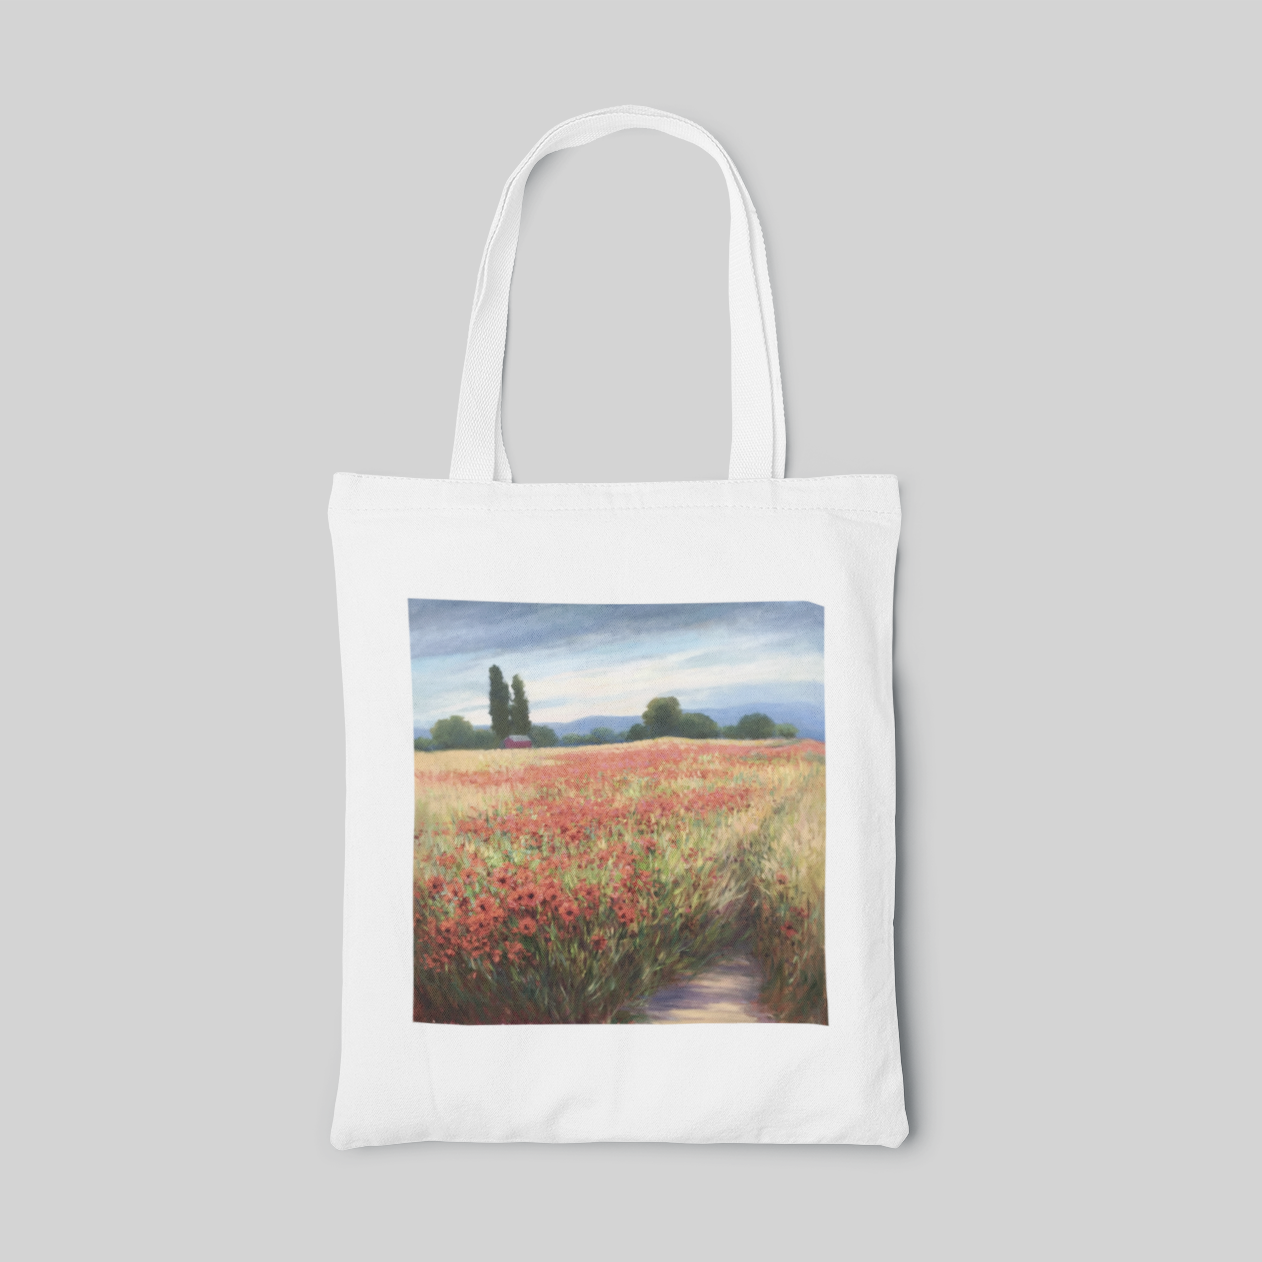 White designed tote bag with poppy field landscape oil painting, front side